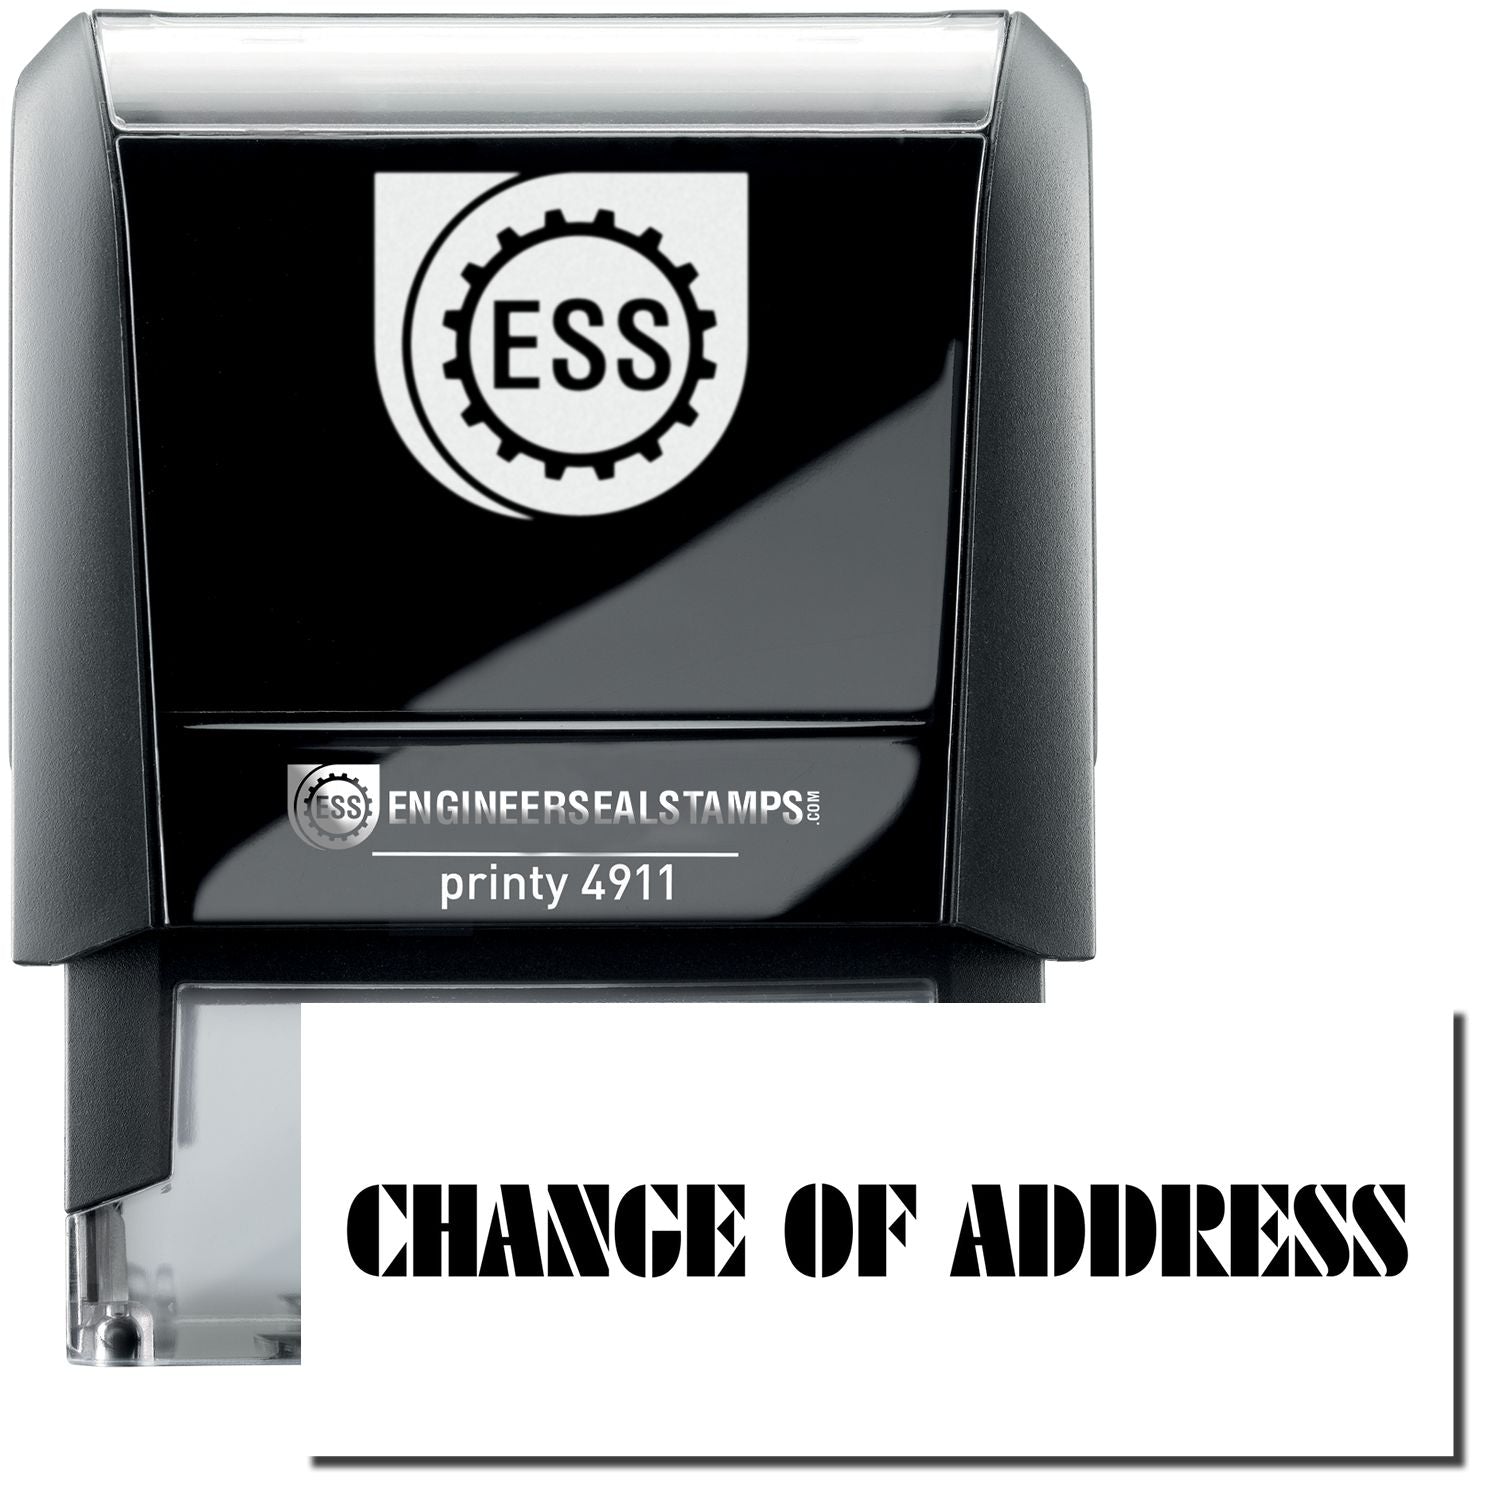 A self-inking stamp with a stamped image showing how the text "CHANGE OF ADDRESS" is displayed after stamping.